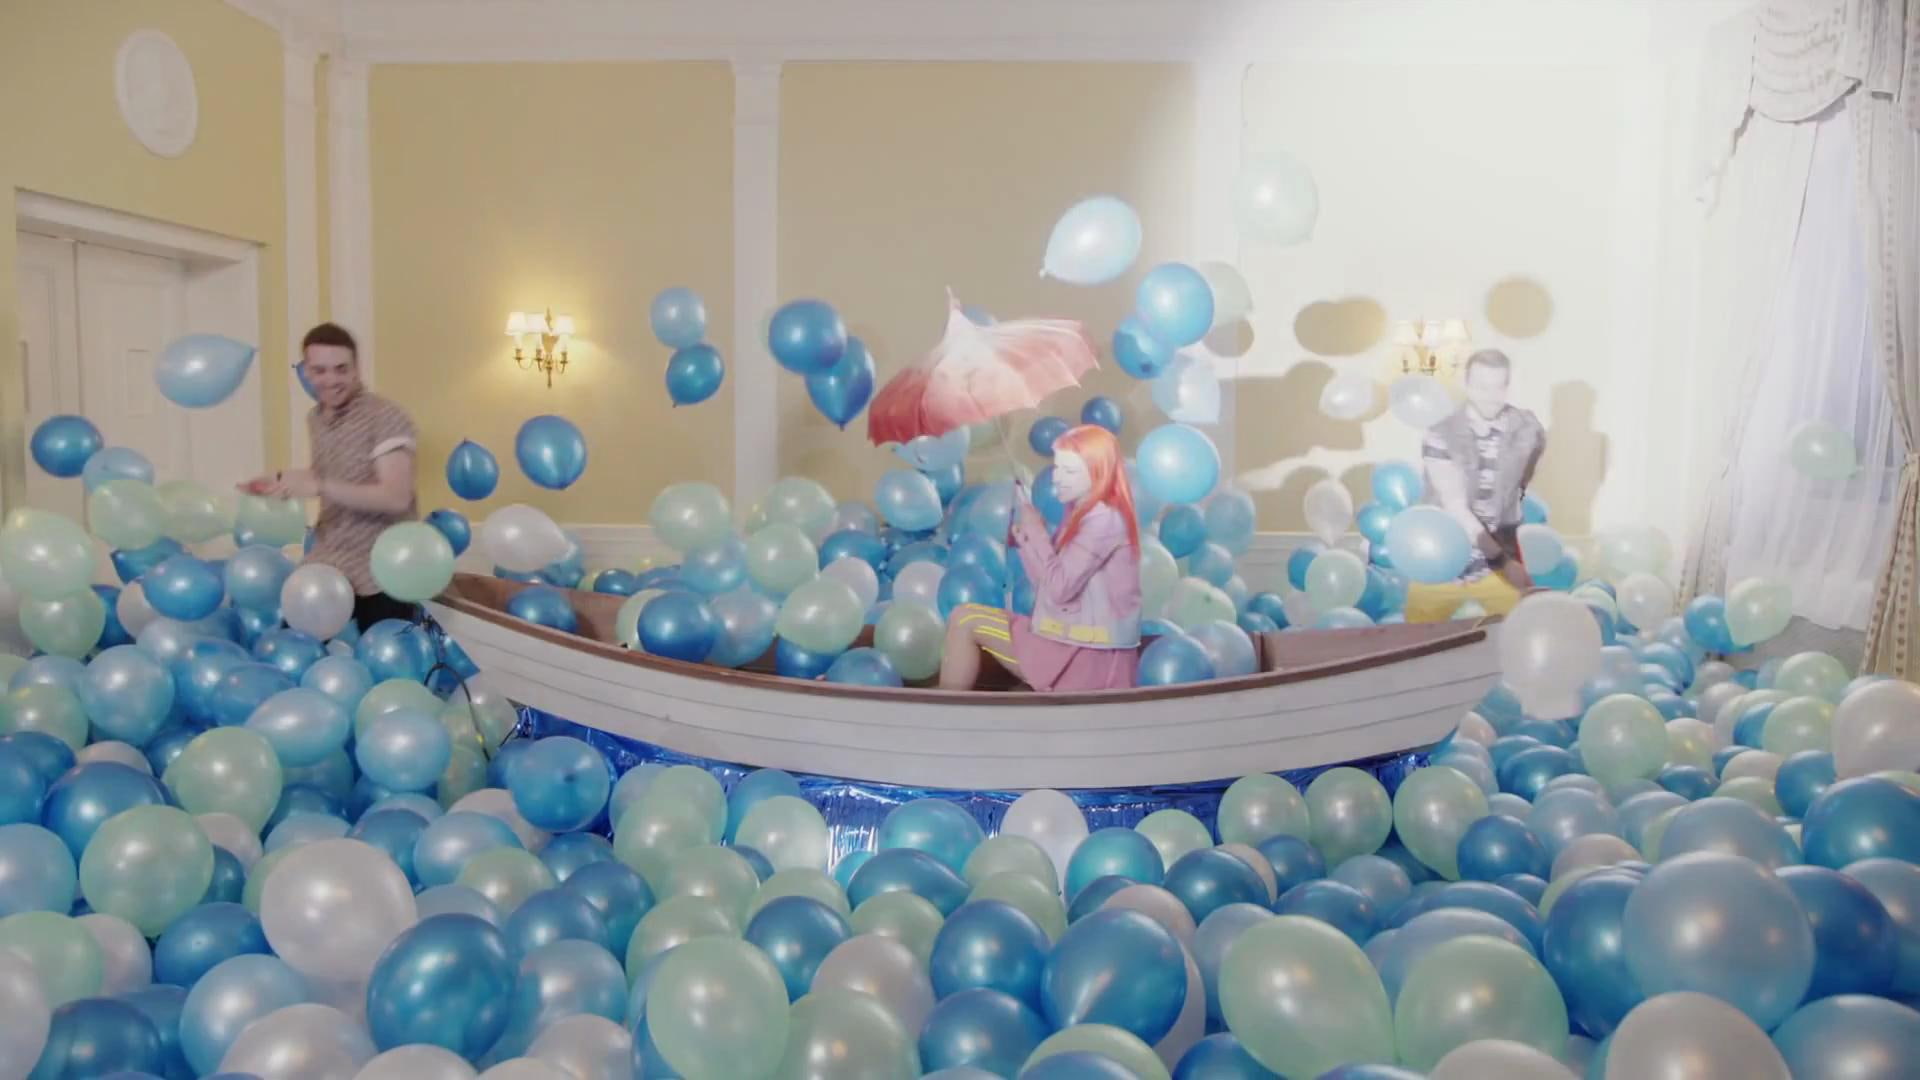 Paramore Still Into You Background, blue and teal balloons, celebrity